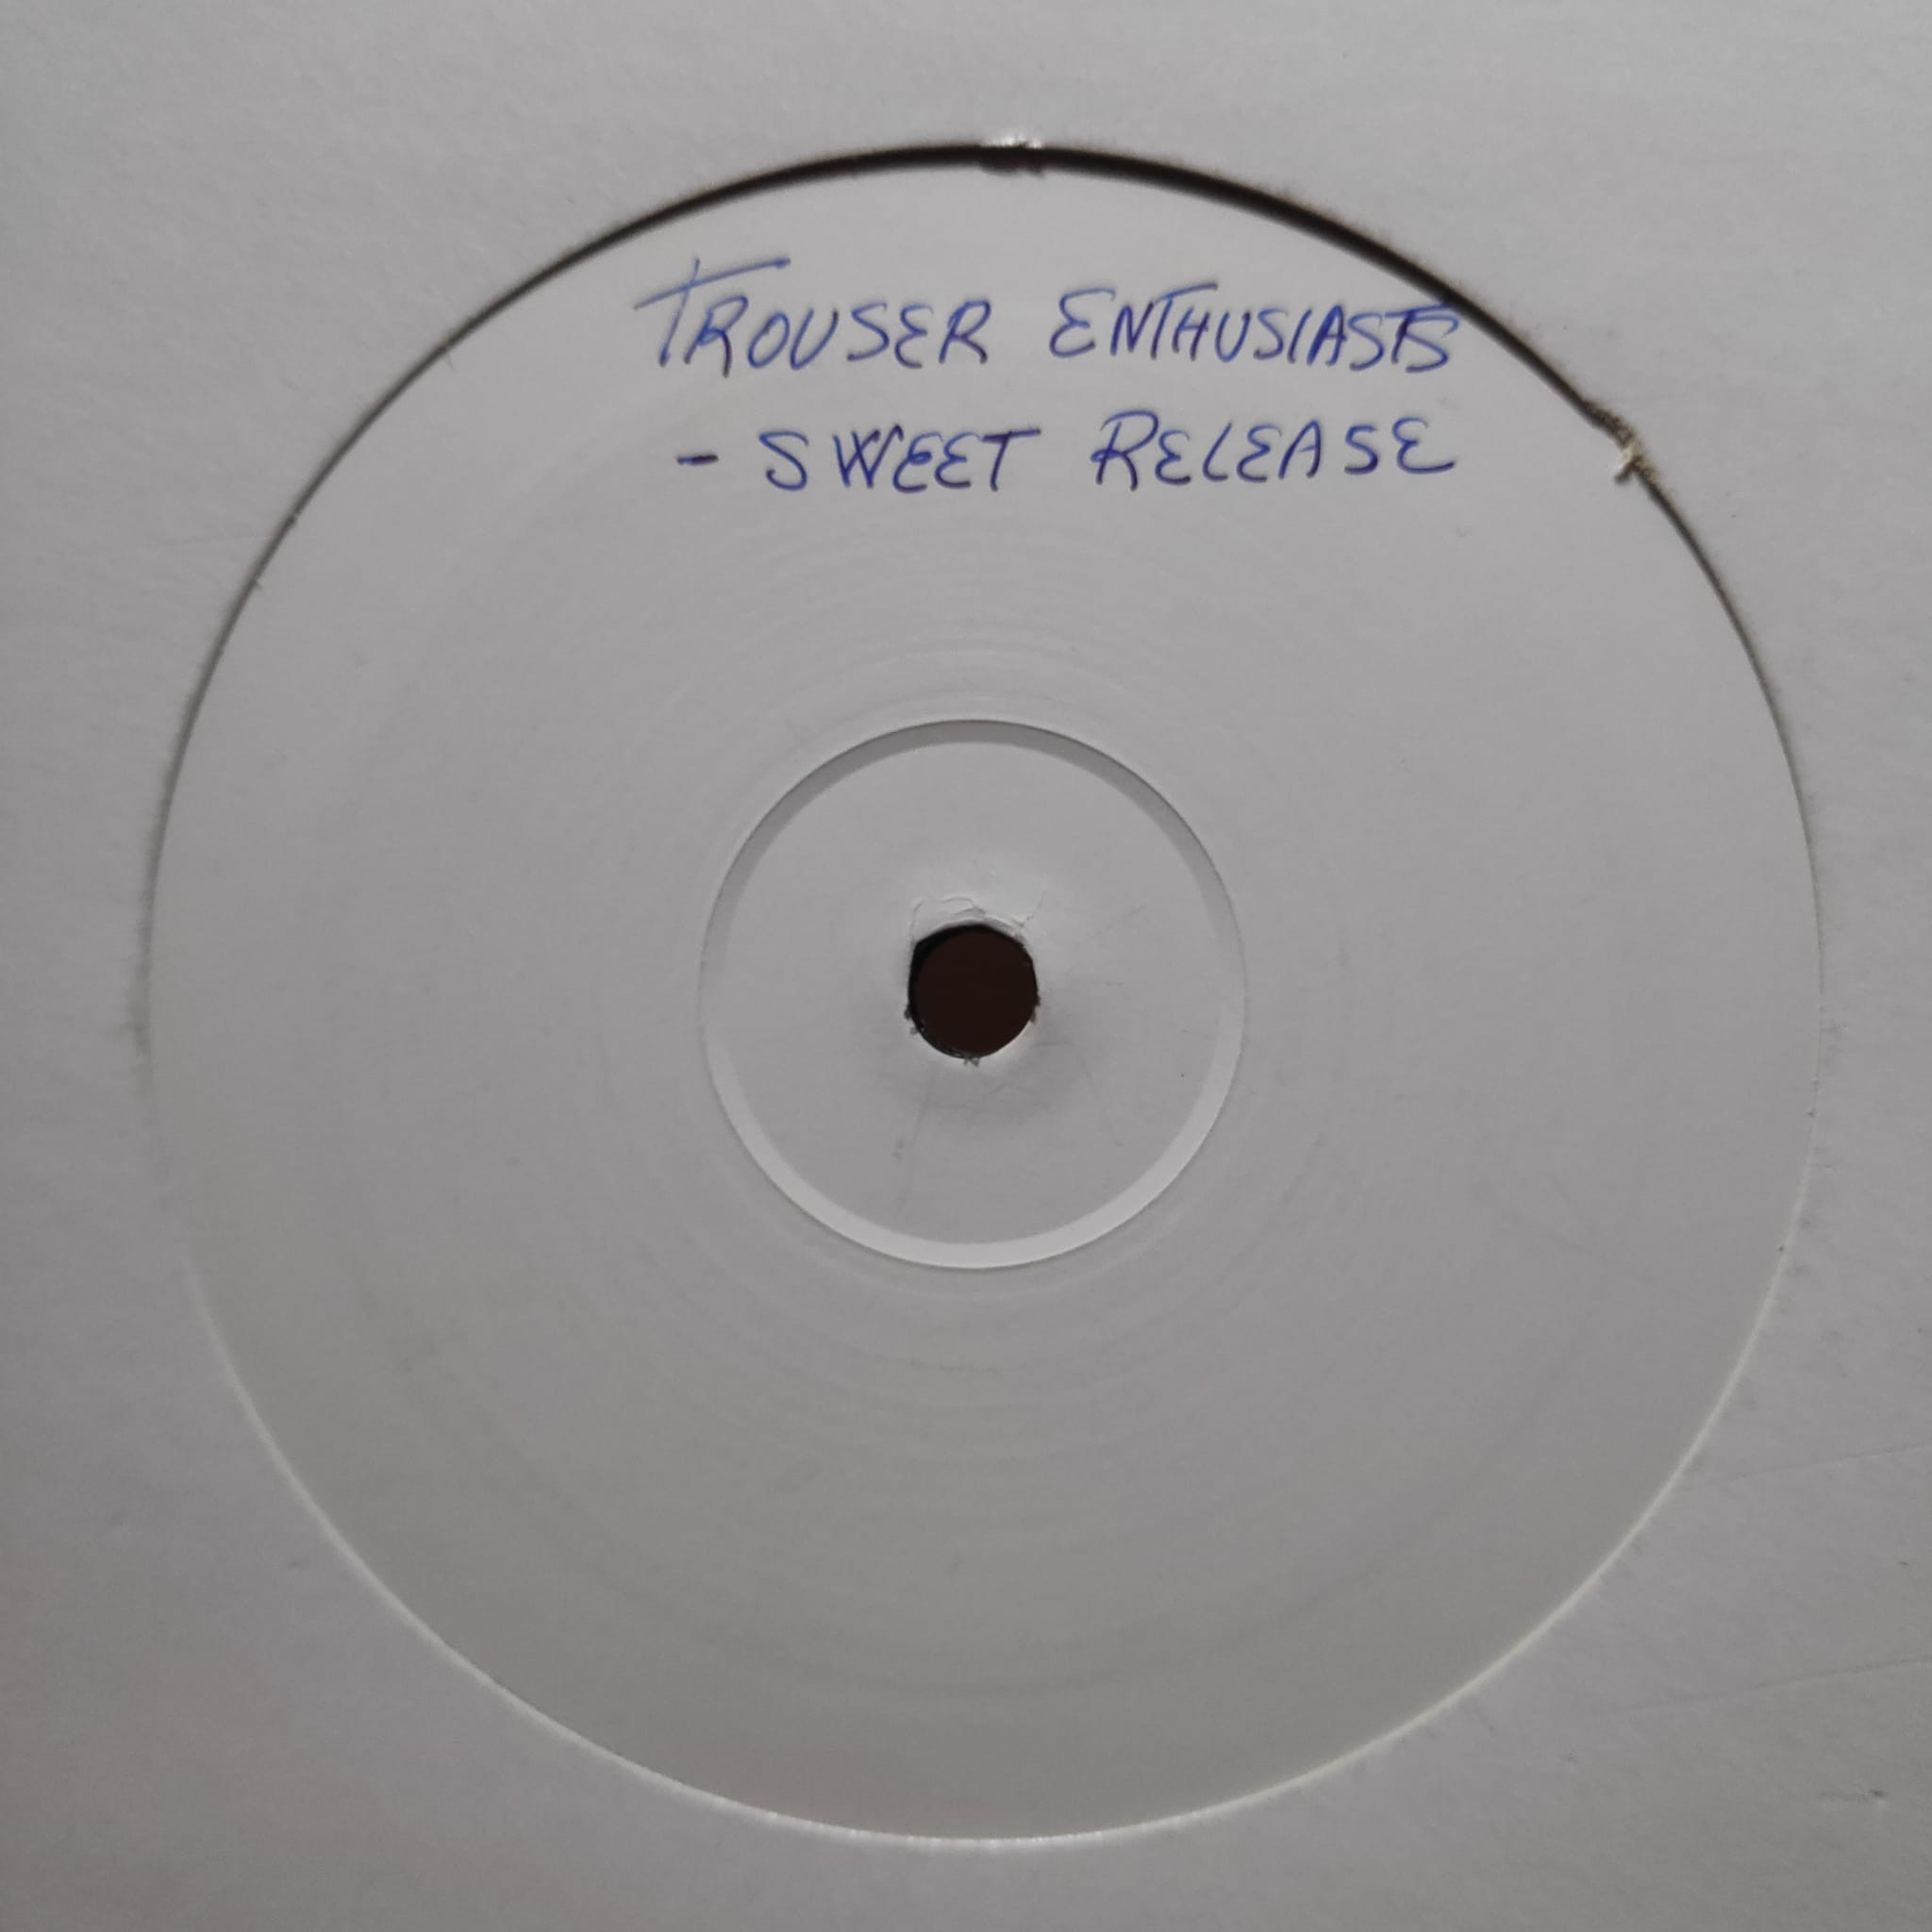 (CUB2093) Friday Night Posse Vs. Trouser Enthusiasts ‎– Sweet Release